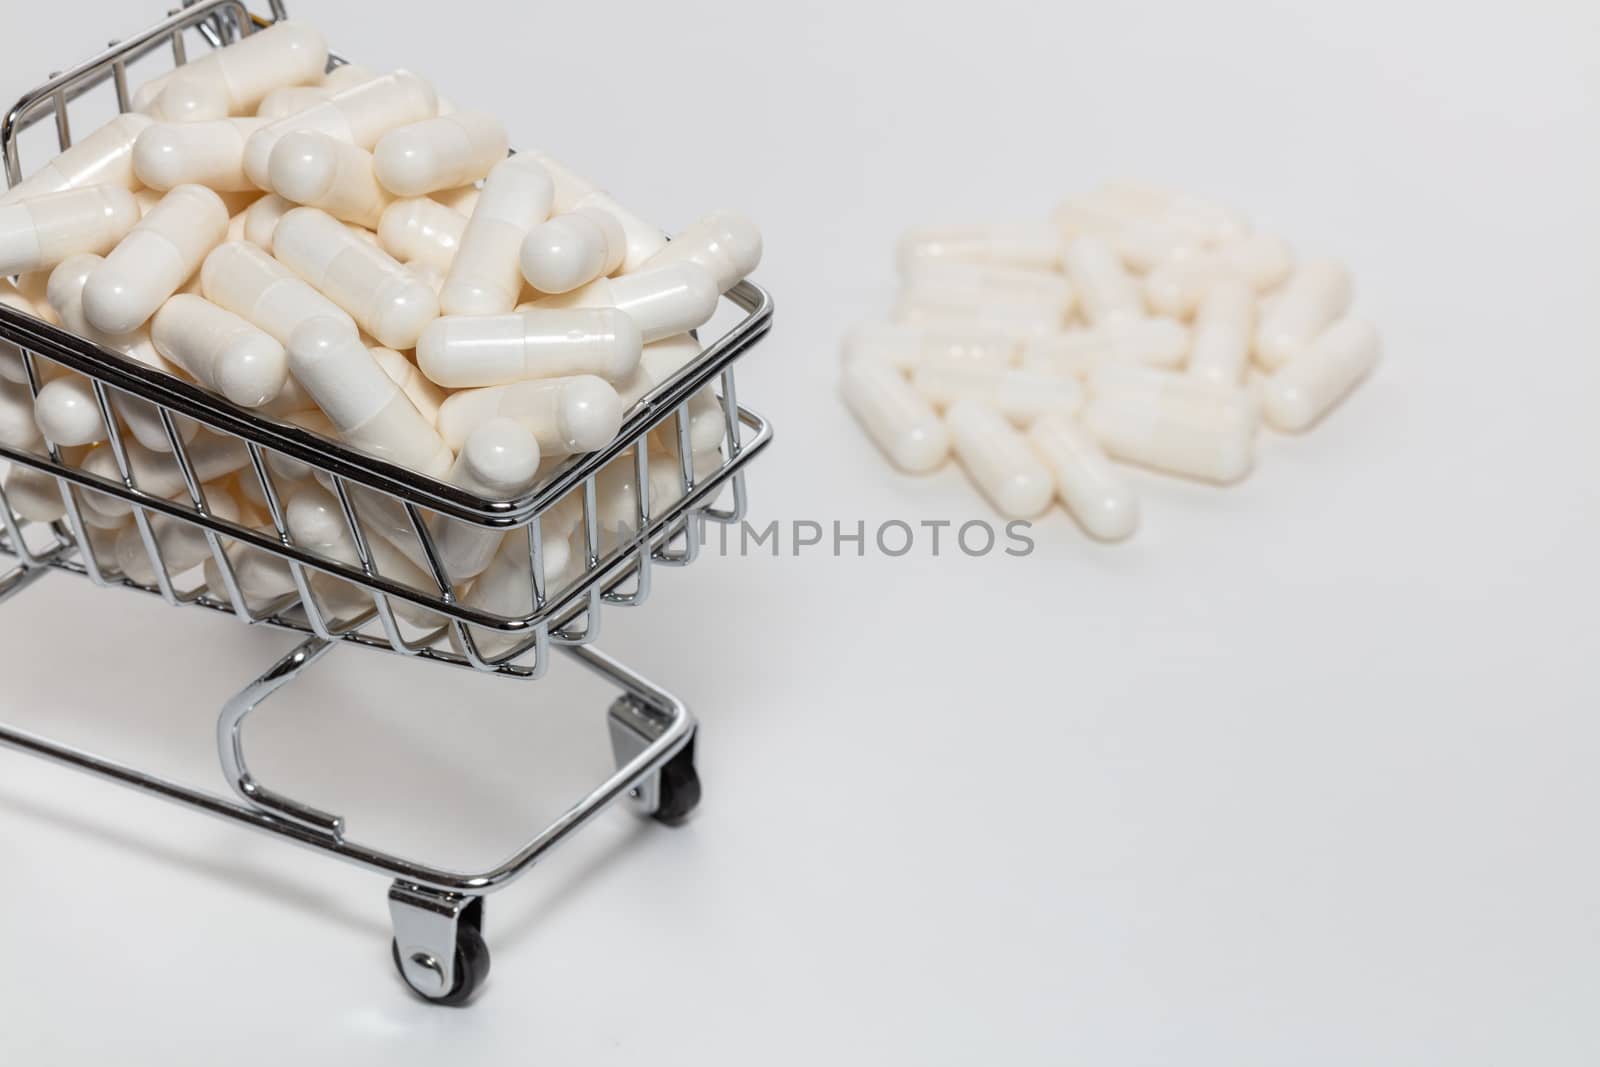 High angle shot of small shopping cart full of white pills. Bunch of pills blurry in the background. White background, close up shot. Shopping online, buying medicine, pharmaceutical business concepts by DamantisZ